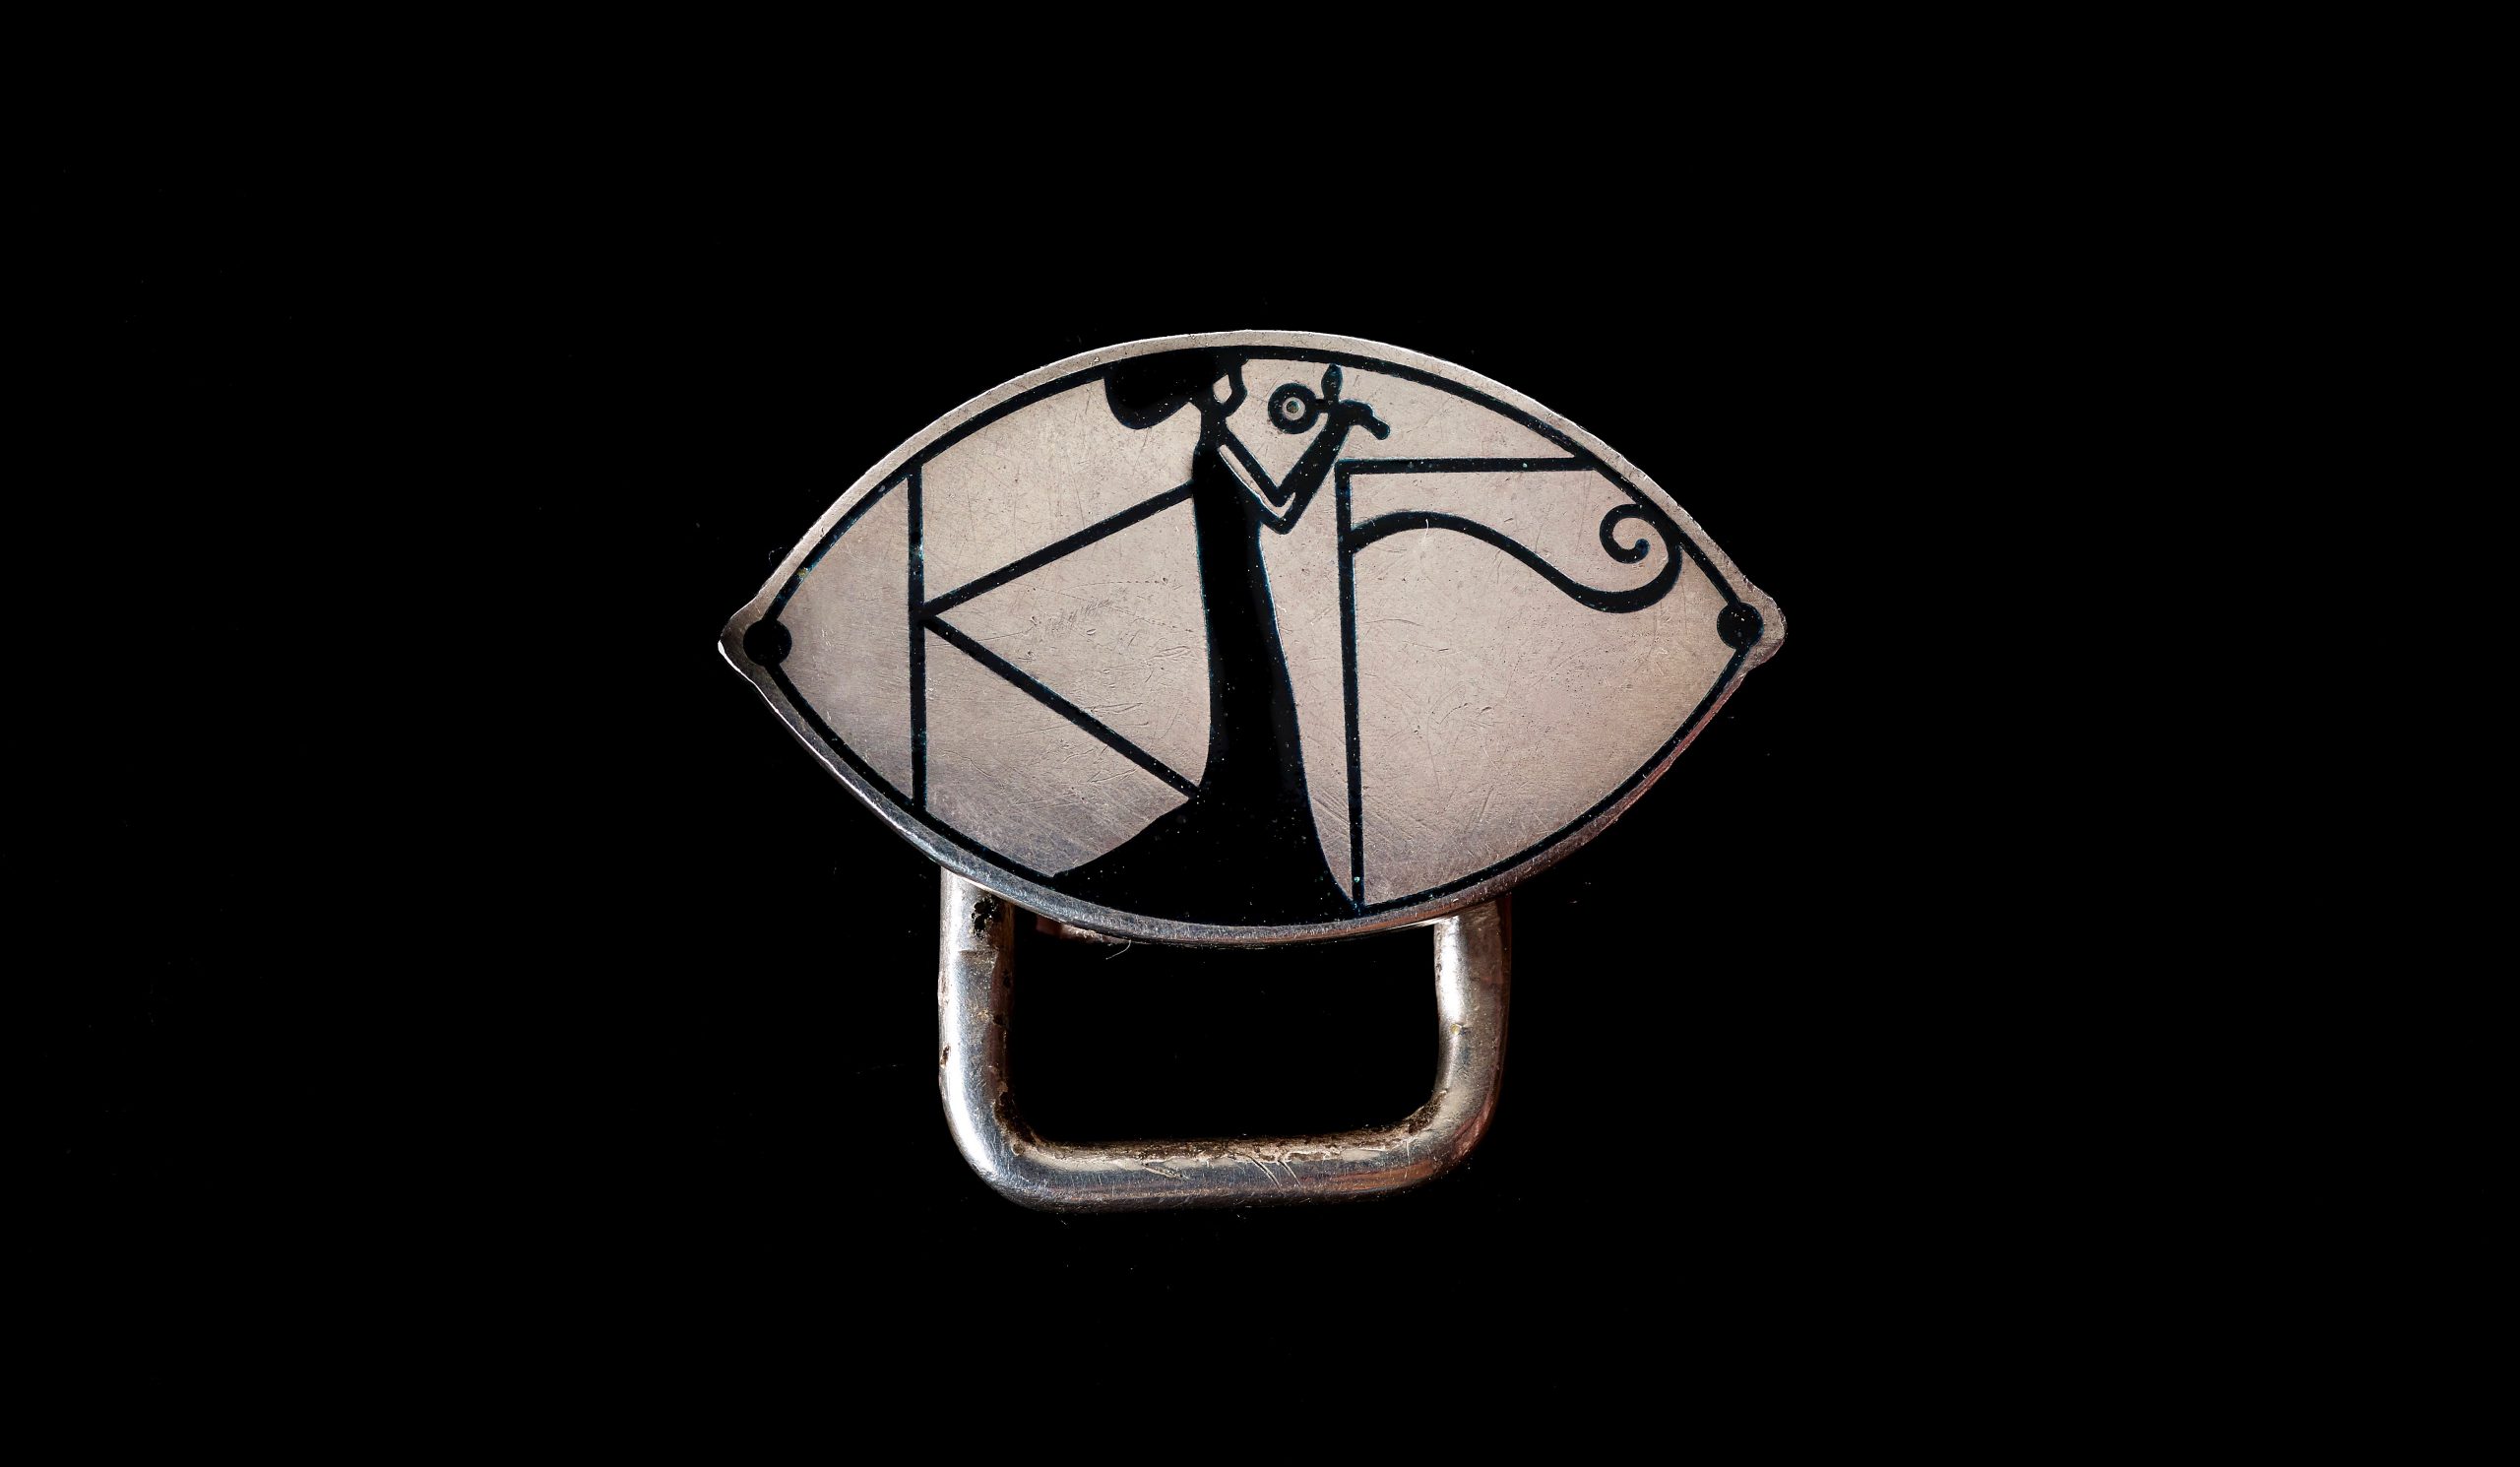 ... Meanwhile this hostess pin, made by Josef Hoffmann and Berthold Löffler in Vienna around 1903, embodied a new artistic vision. The piece wakes visual echoes of ancient times while showing a sleek modern woman in a geometric setting. (photo: John Faier, © Driehaus Museum)